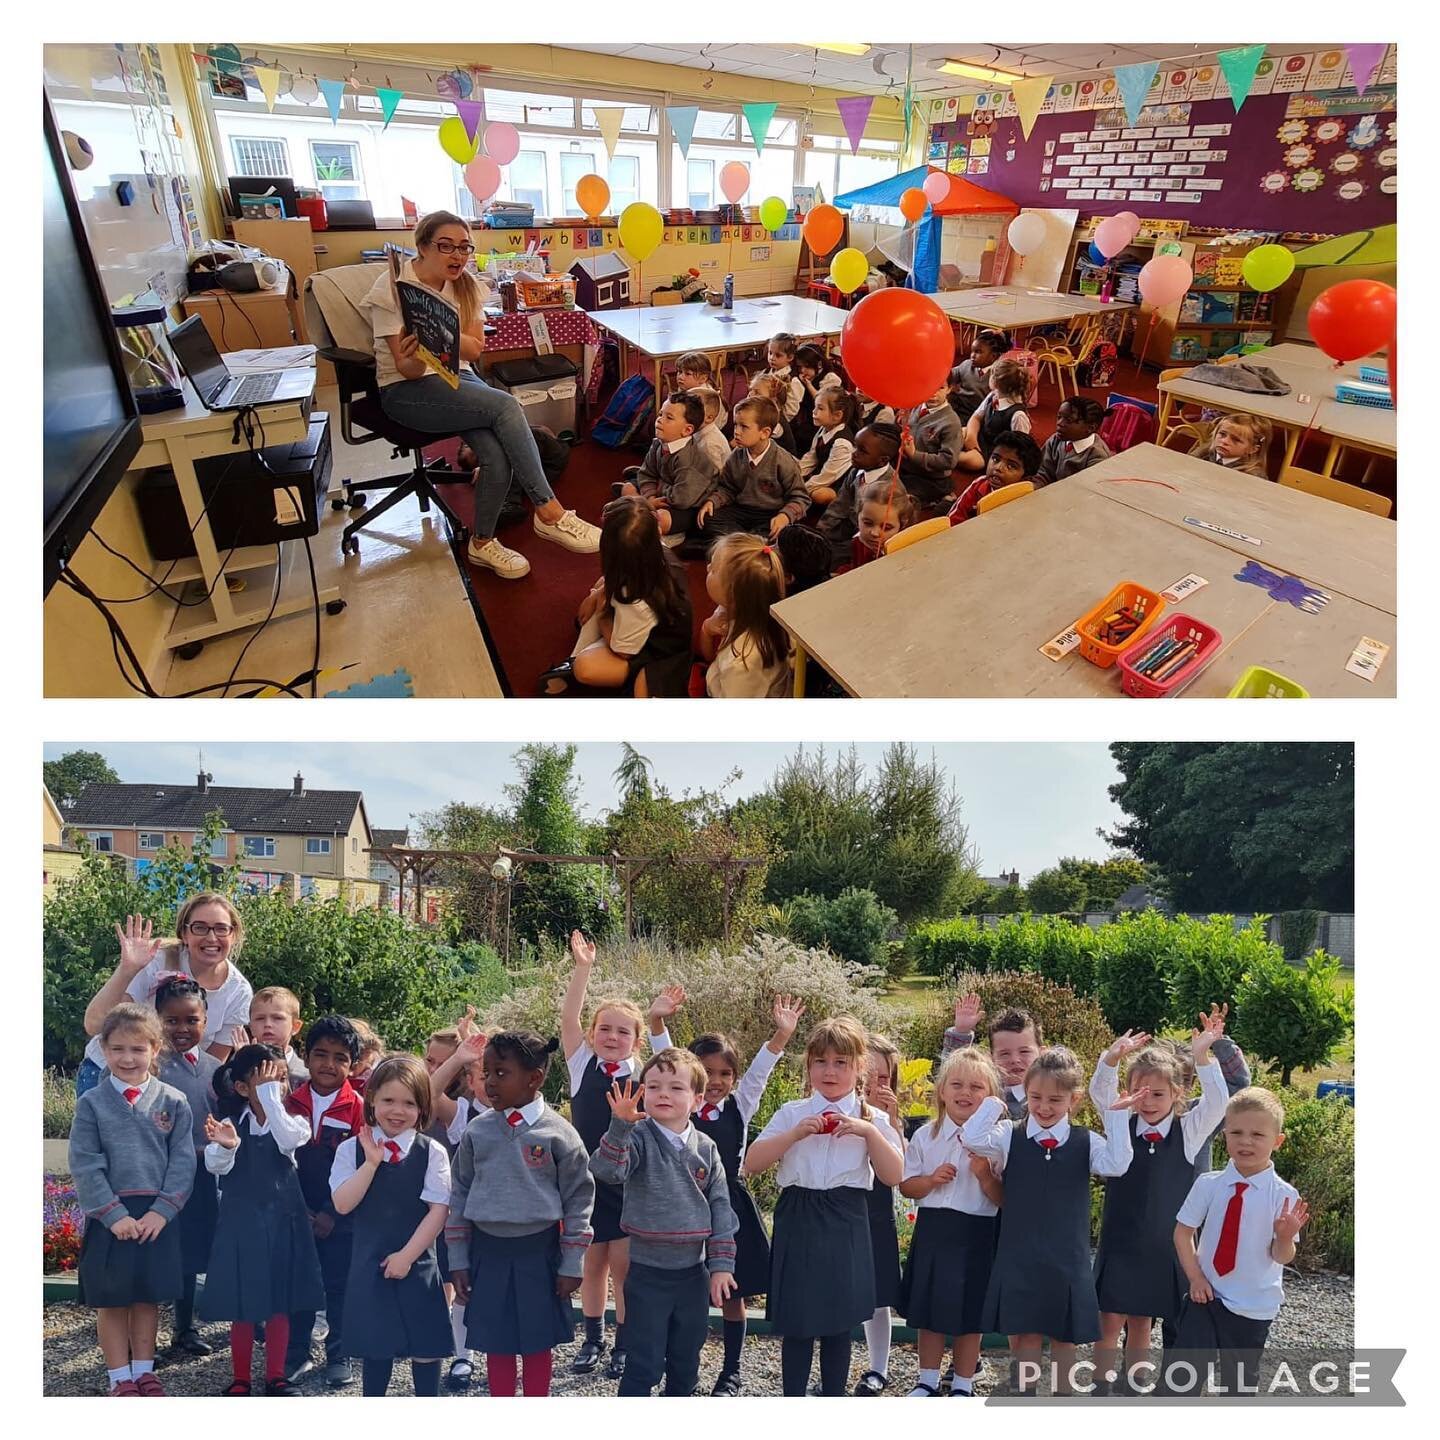 Junior Infants had a wonderful first day at school! The boys and girls enjoyed meeting all their new friends!